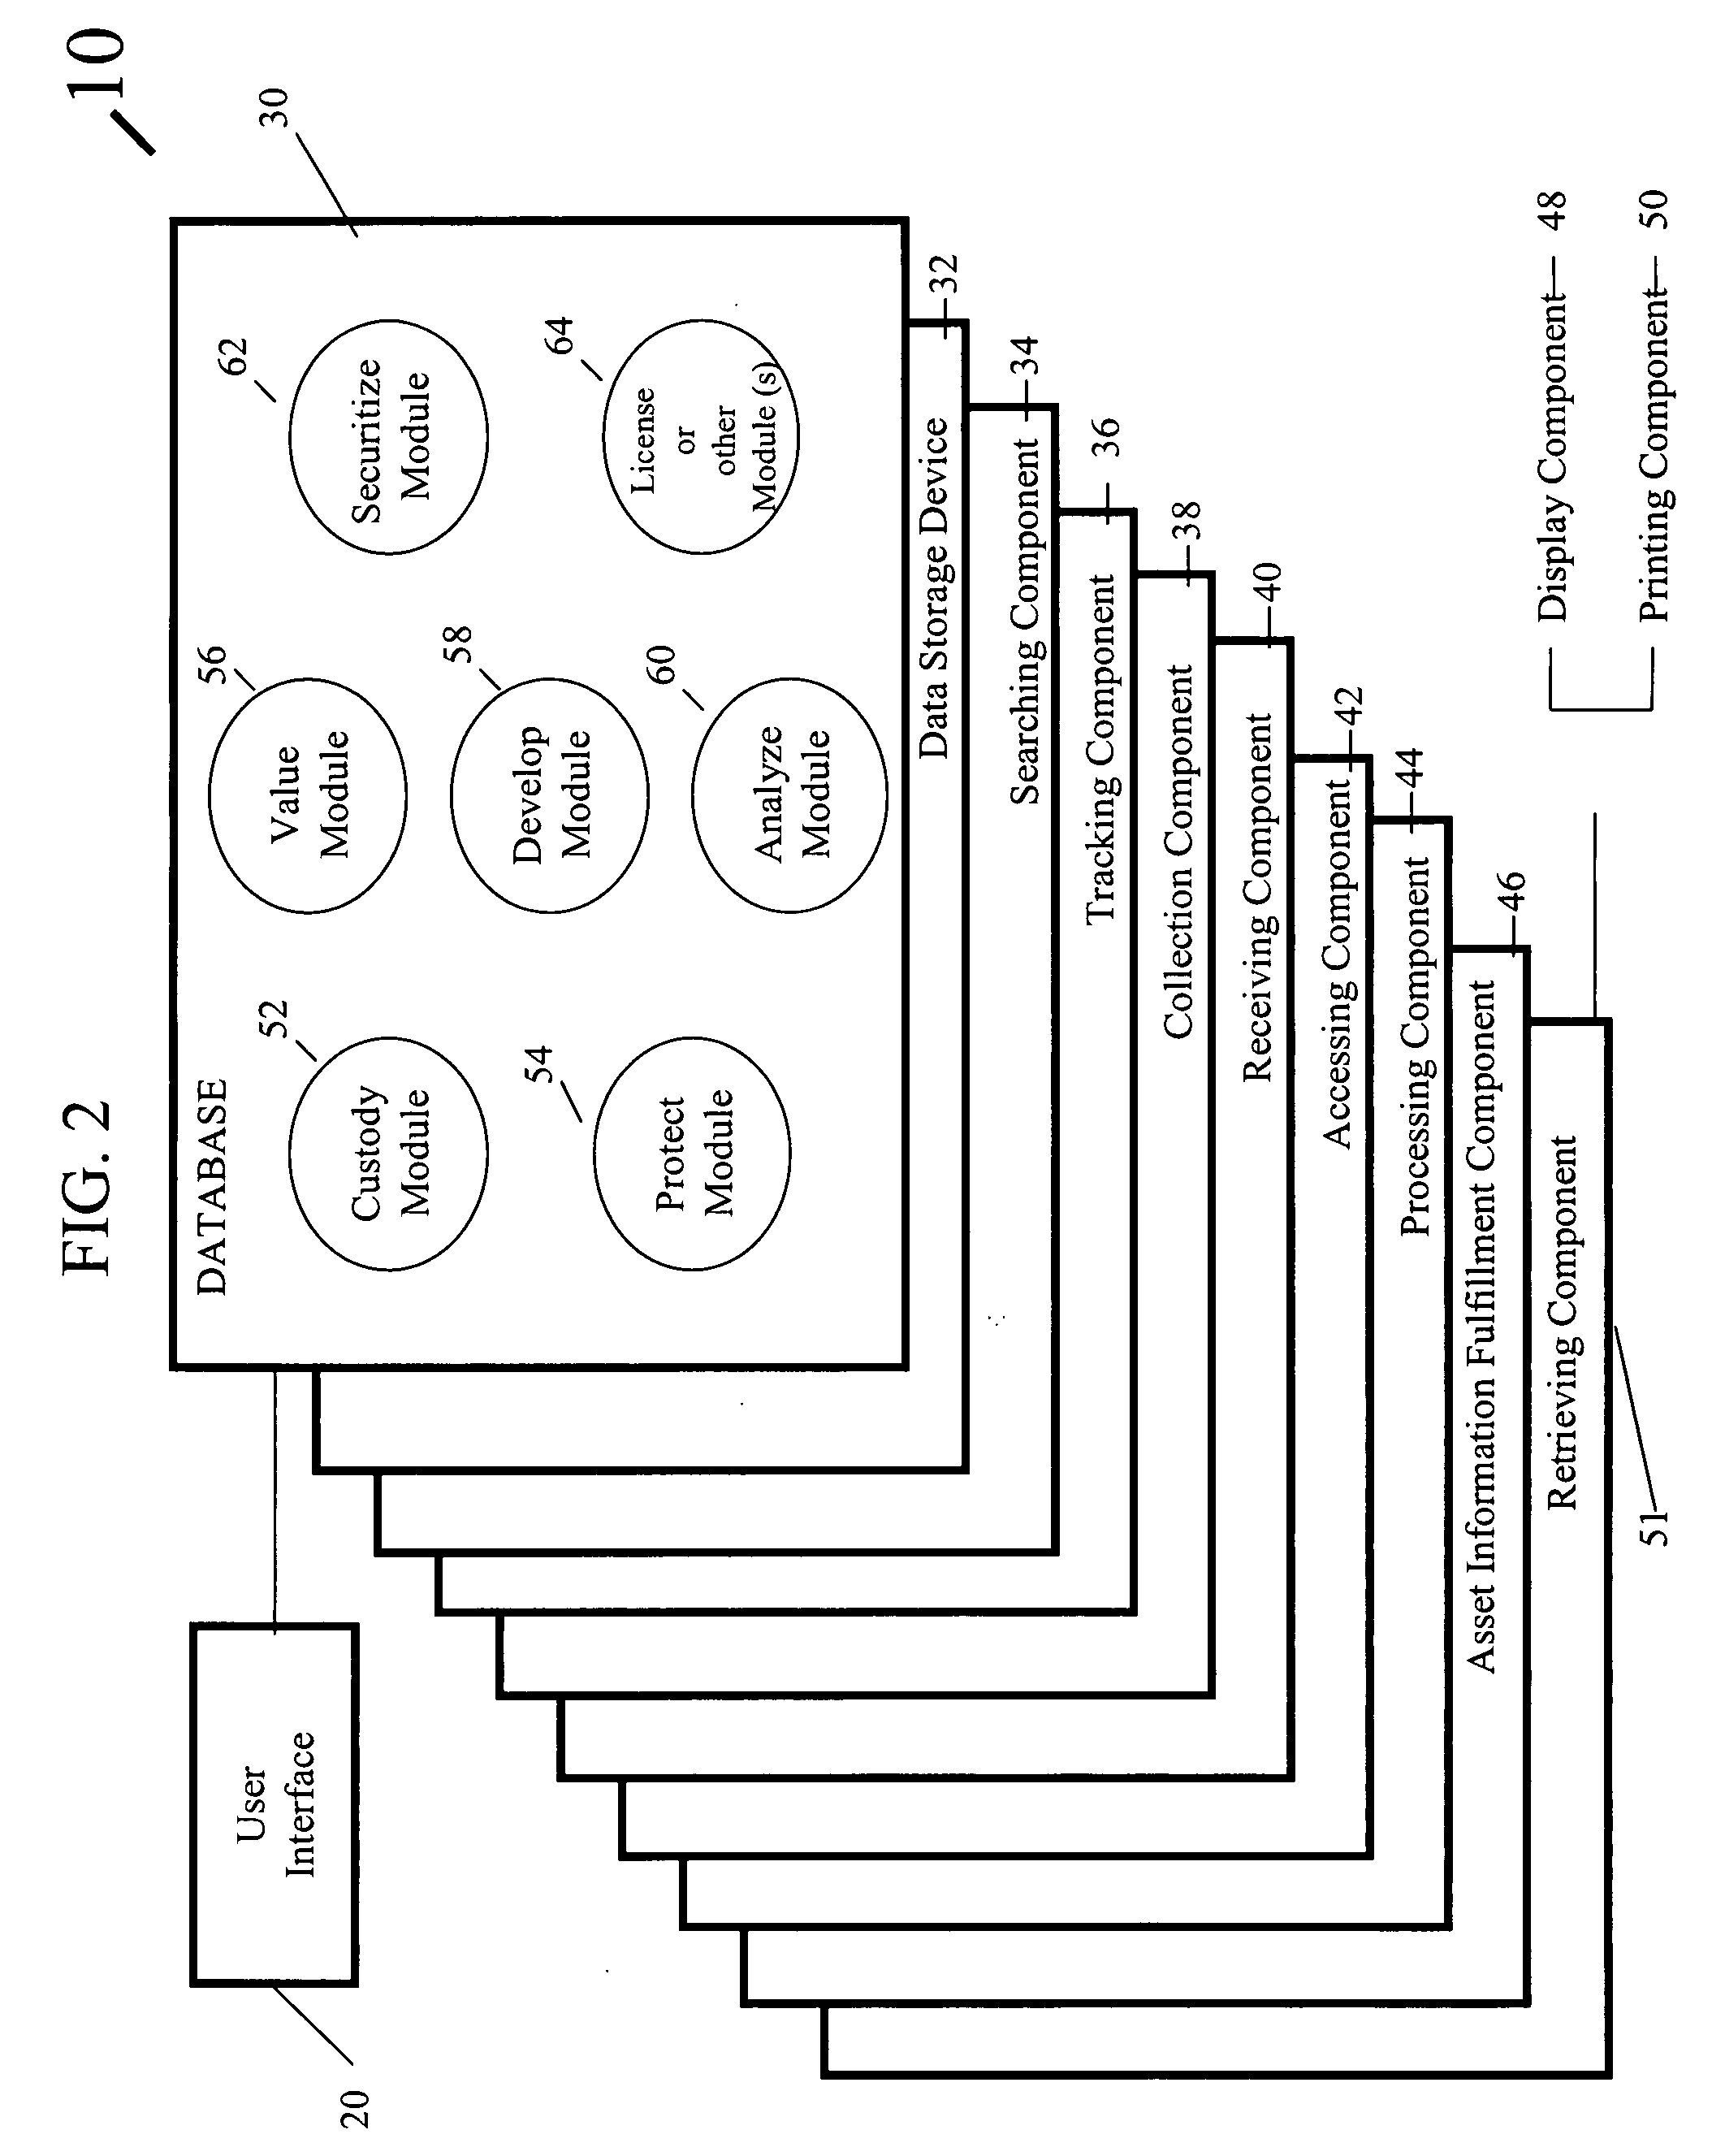 Systems and methods for management of intangible assets